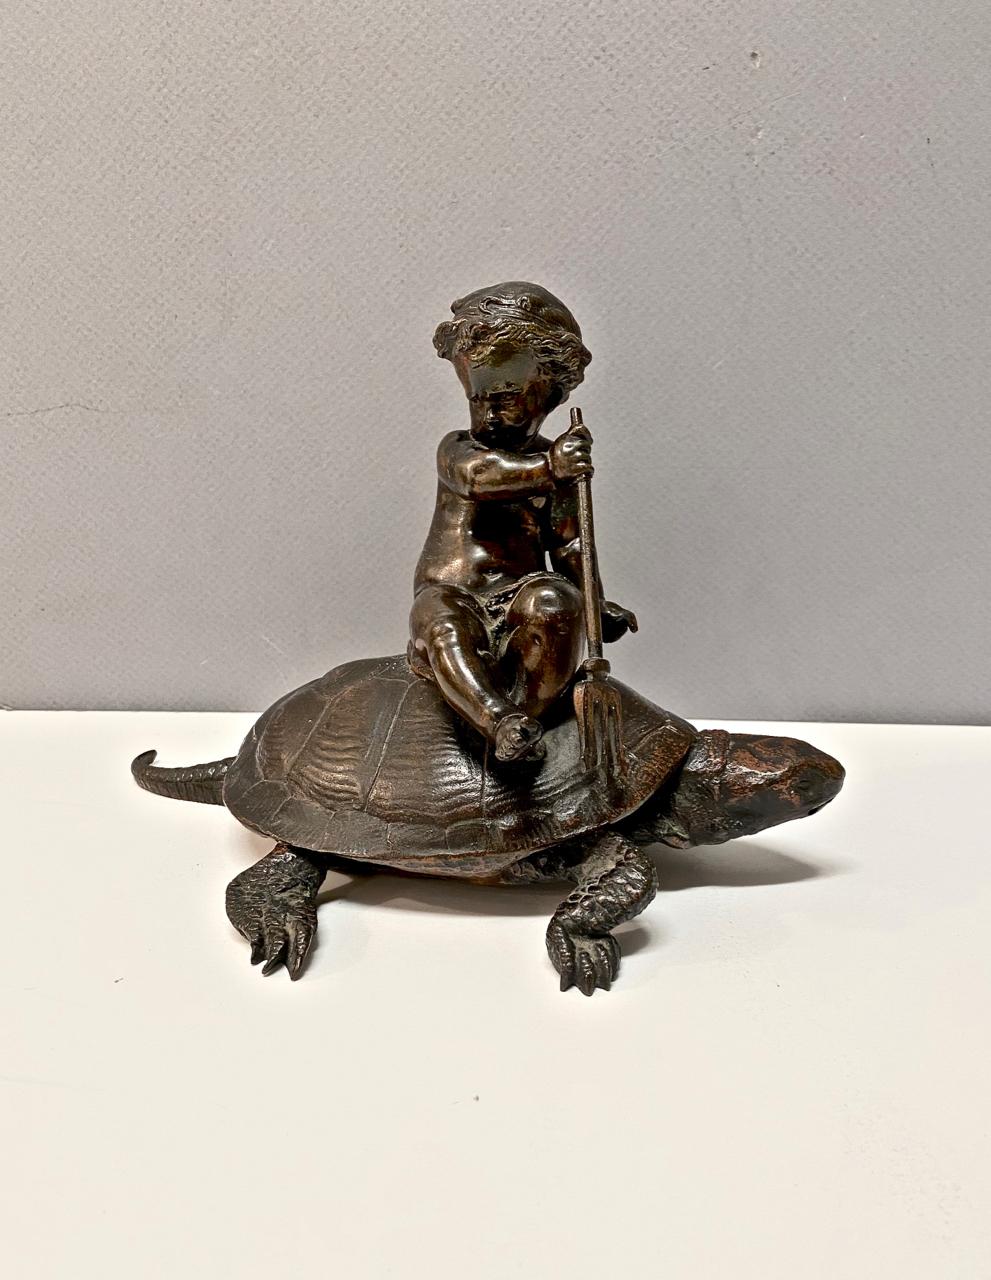 This is a charming figural sculpture of a Putti with trident riding on a tortoise. To the ancient Greeks and Romans, the tortoise was a symbol of love and fertility; the tortoise was considered an attribute of Aphrodite. For the Japanese, the